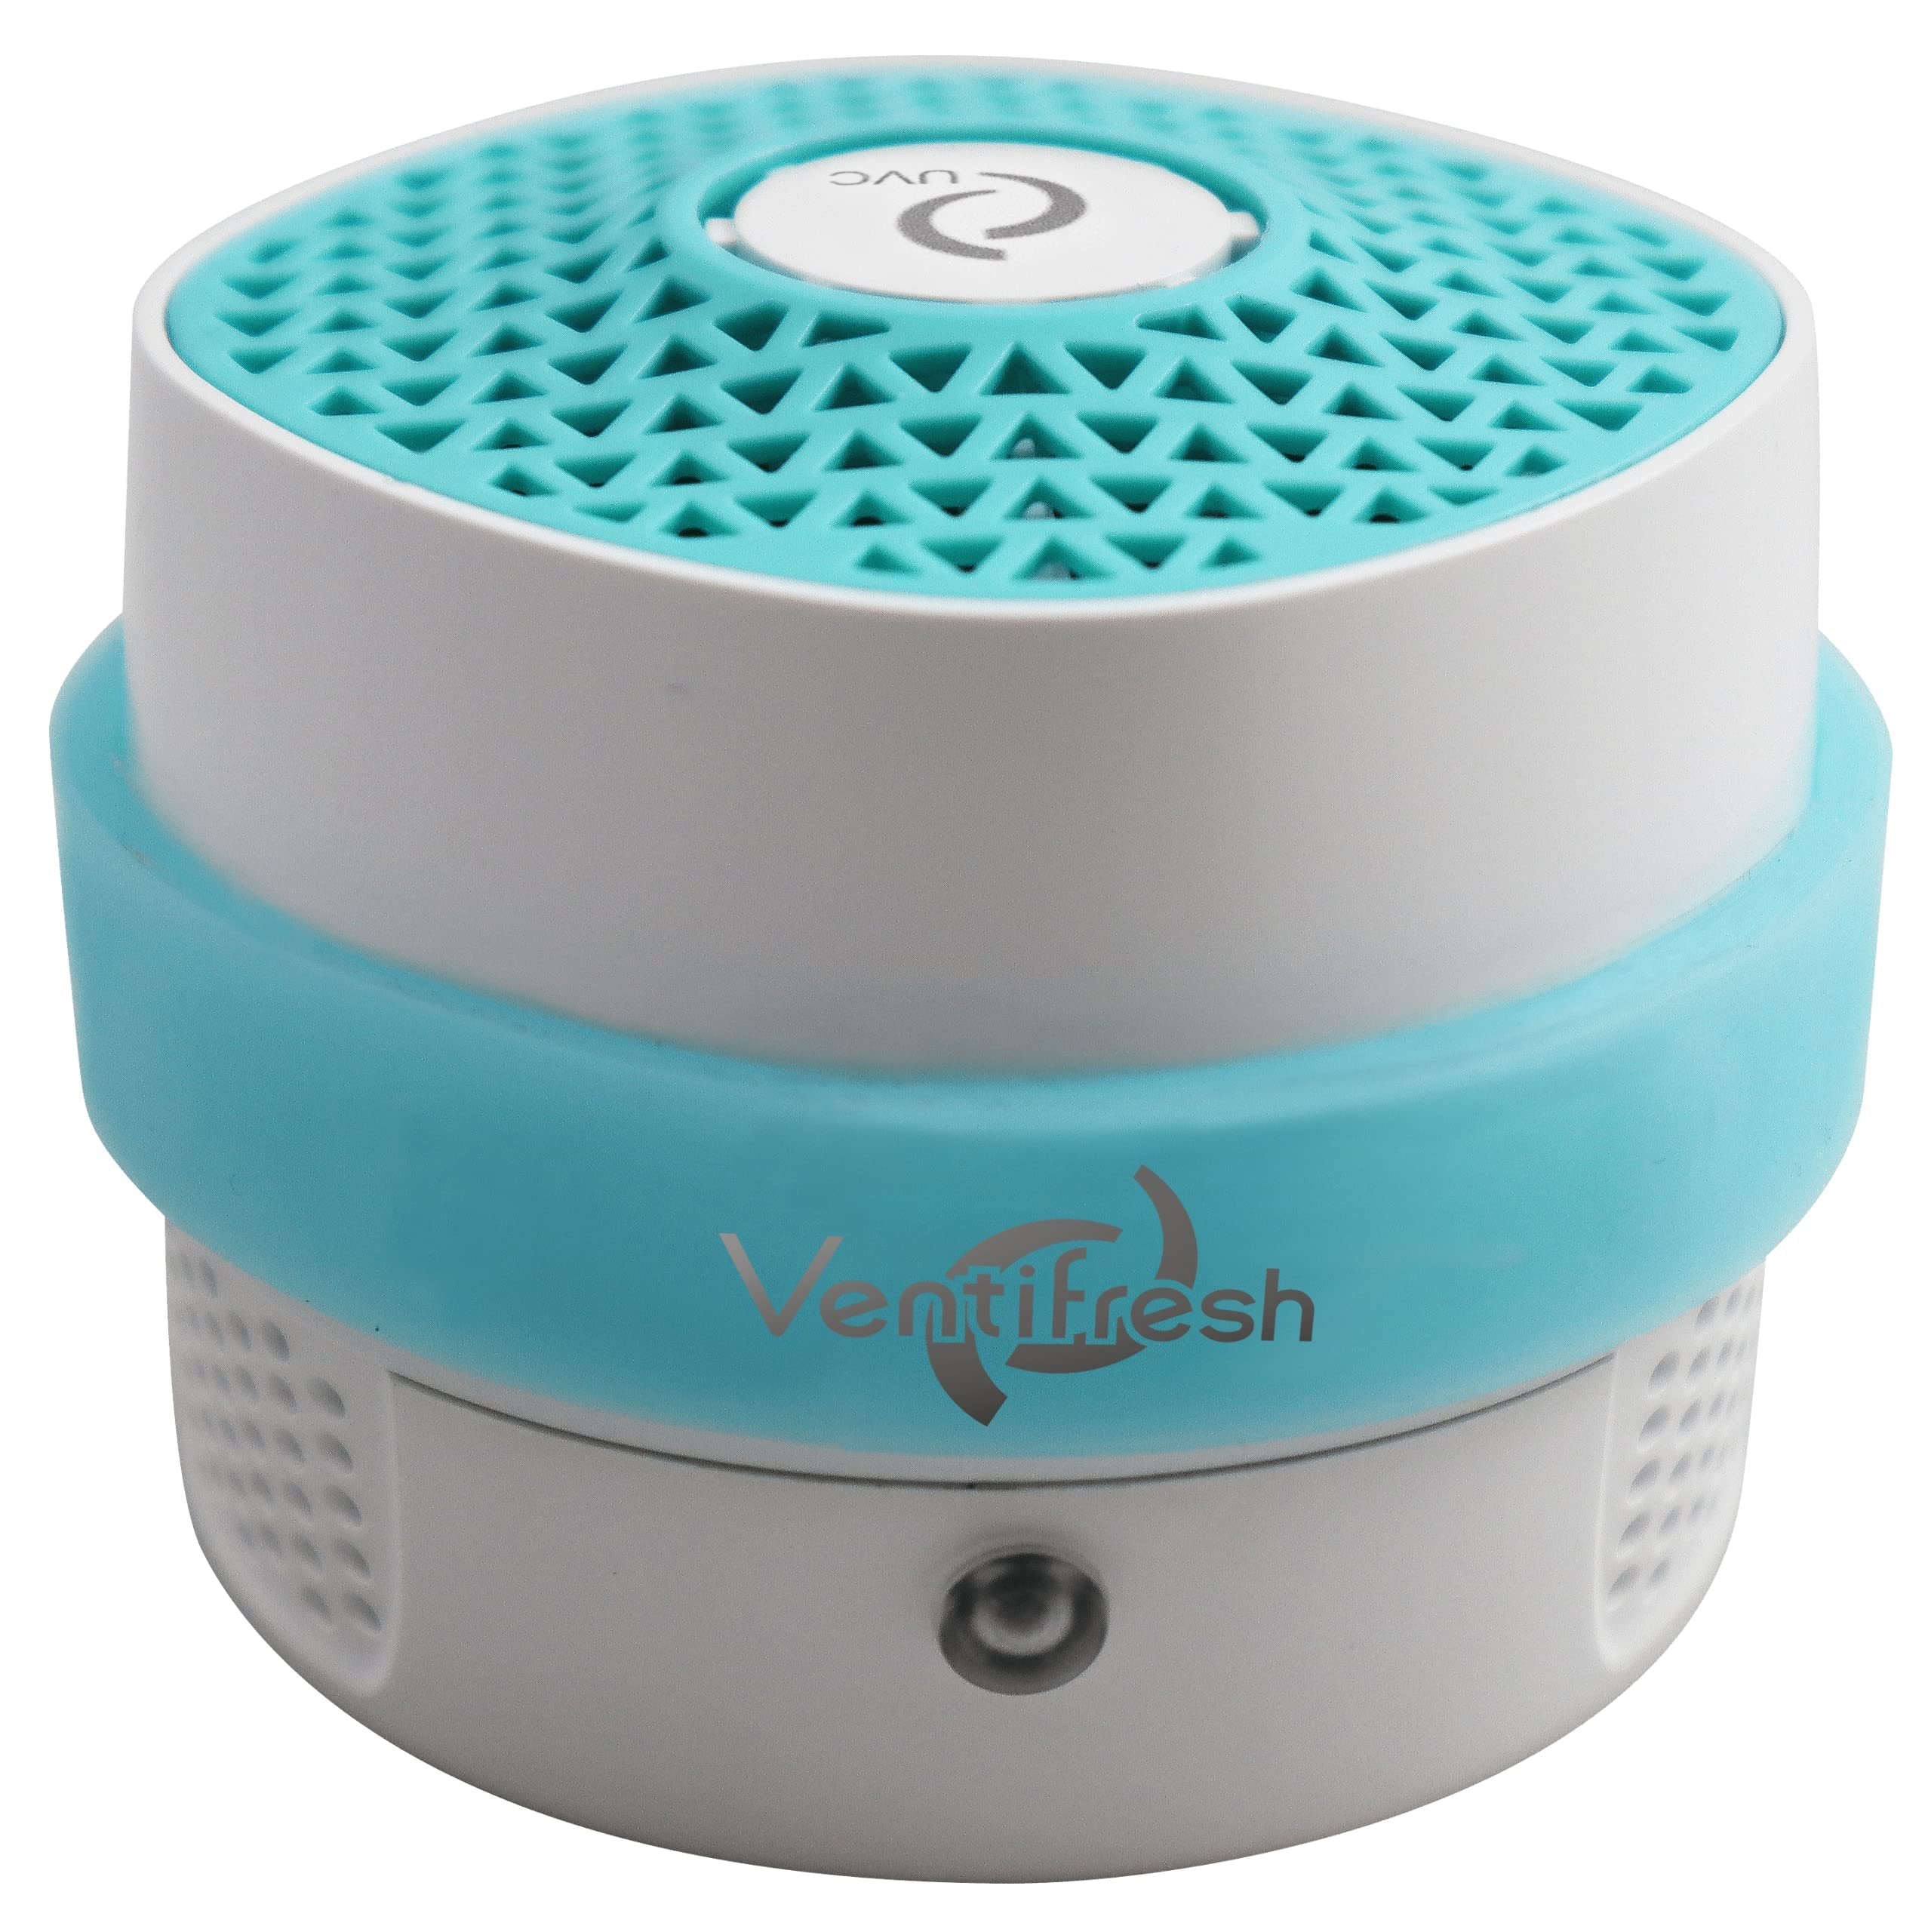 VentiFresh ECO Plus Odor Eliminator Air Purifier for Large Room, Office, Car, Home, School - ChemicalFree & UV-C Air Sanitizer for Strong Odor, Pet Litter Box, Bathroom, Trash, Smokers - Eco Friendly